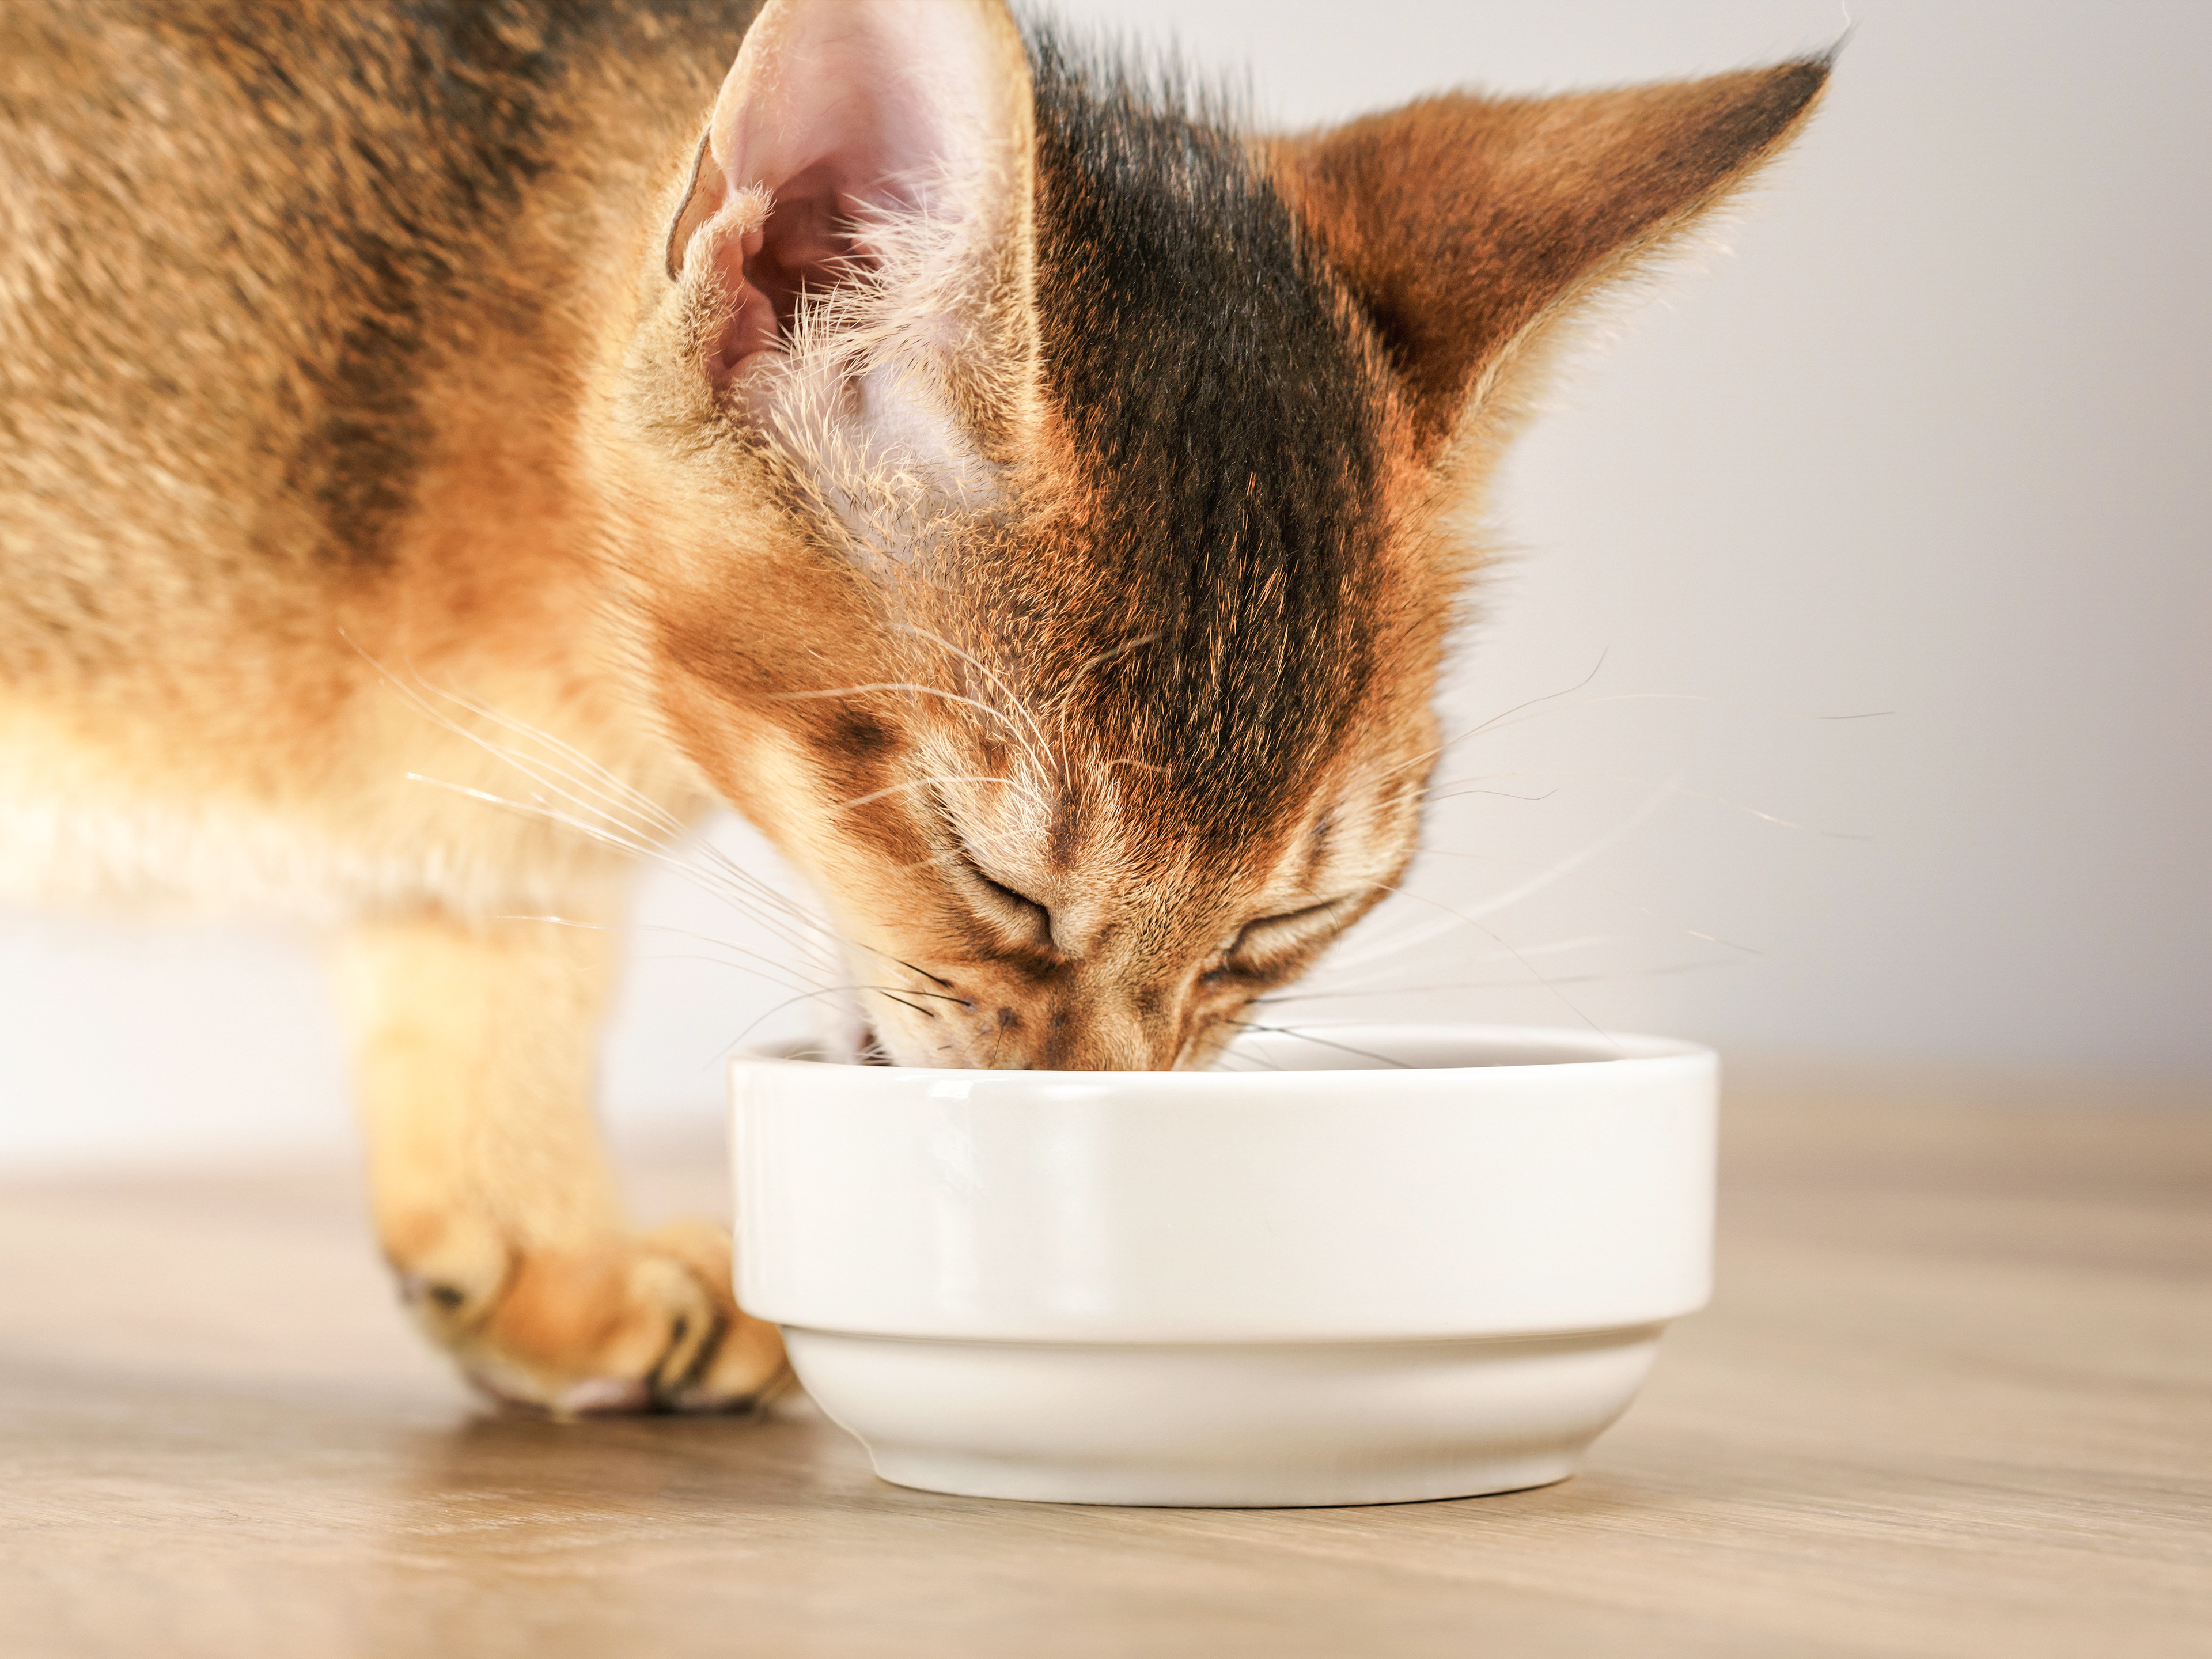 Abyssinian kitten standing indoors eating from a white feeding bowl